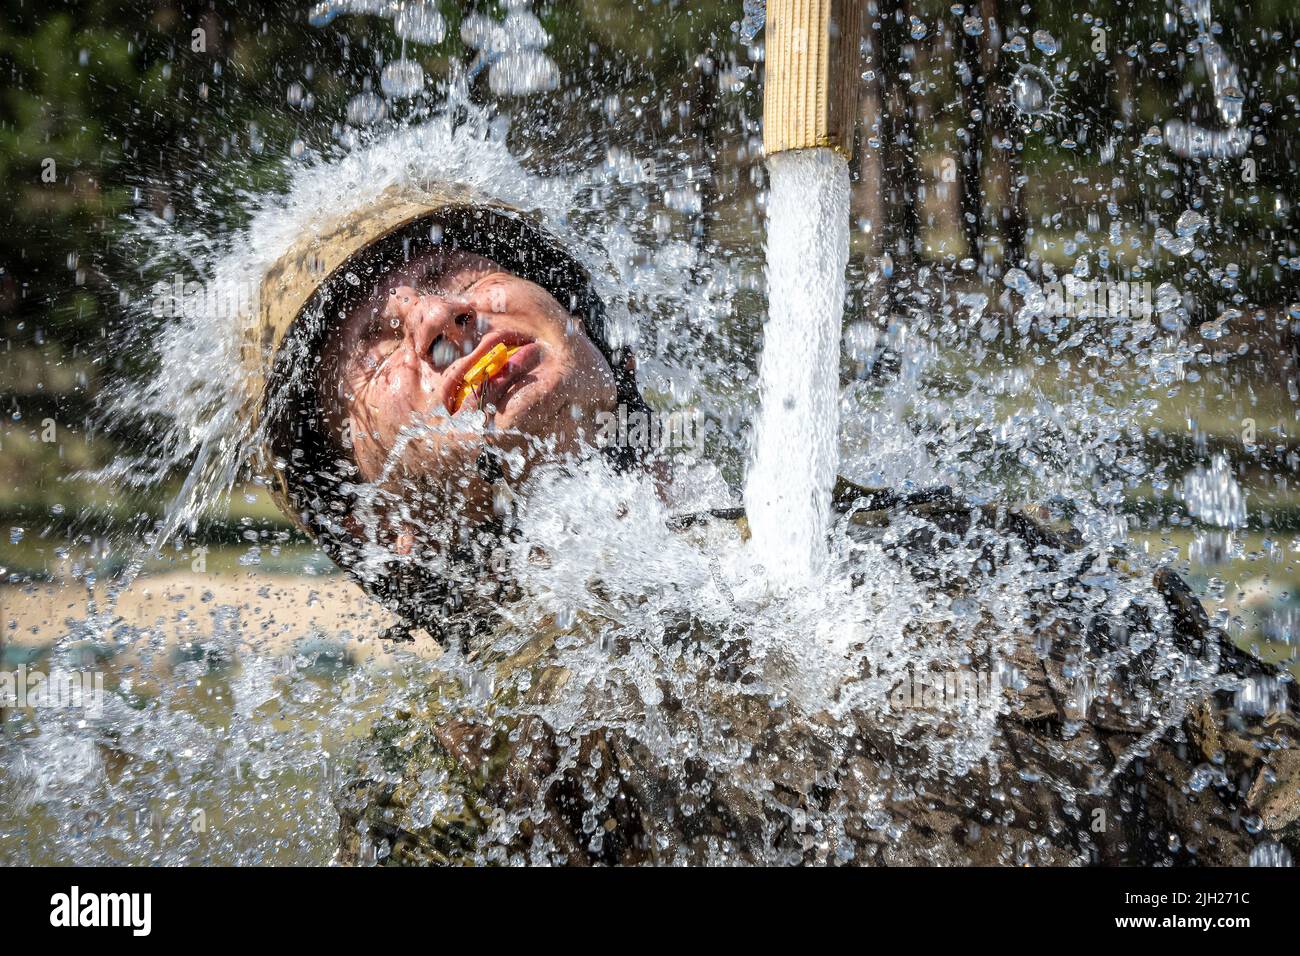 Colorado Springs, United States of America. 12 July, 2022. U.S. Air Force Academy students cool off during the Basic Cadet Training assault course at the Air Force Academy Jacks Valley, July 12, 2022 in Colorado Springs, Colorado. Basic Cadet Training is a six-week indoctrination program to transformation civilian students into military academy cadets. Credit: Justin Pacheco/US Air Force Photo/Alamy Live News Stock Photo